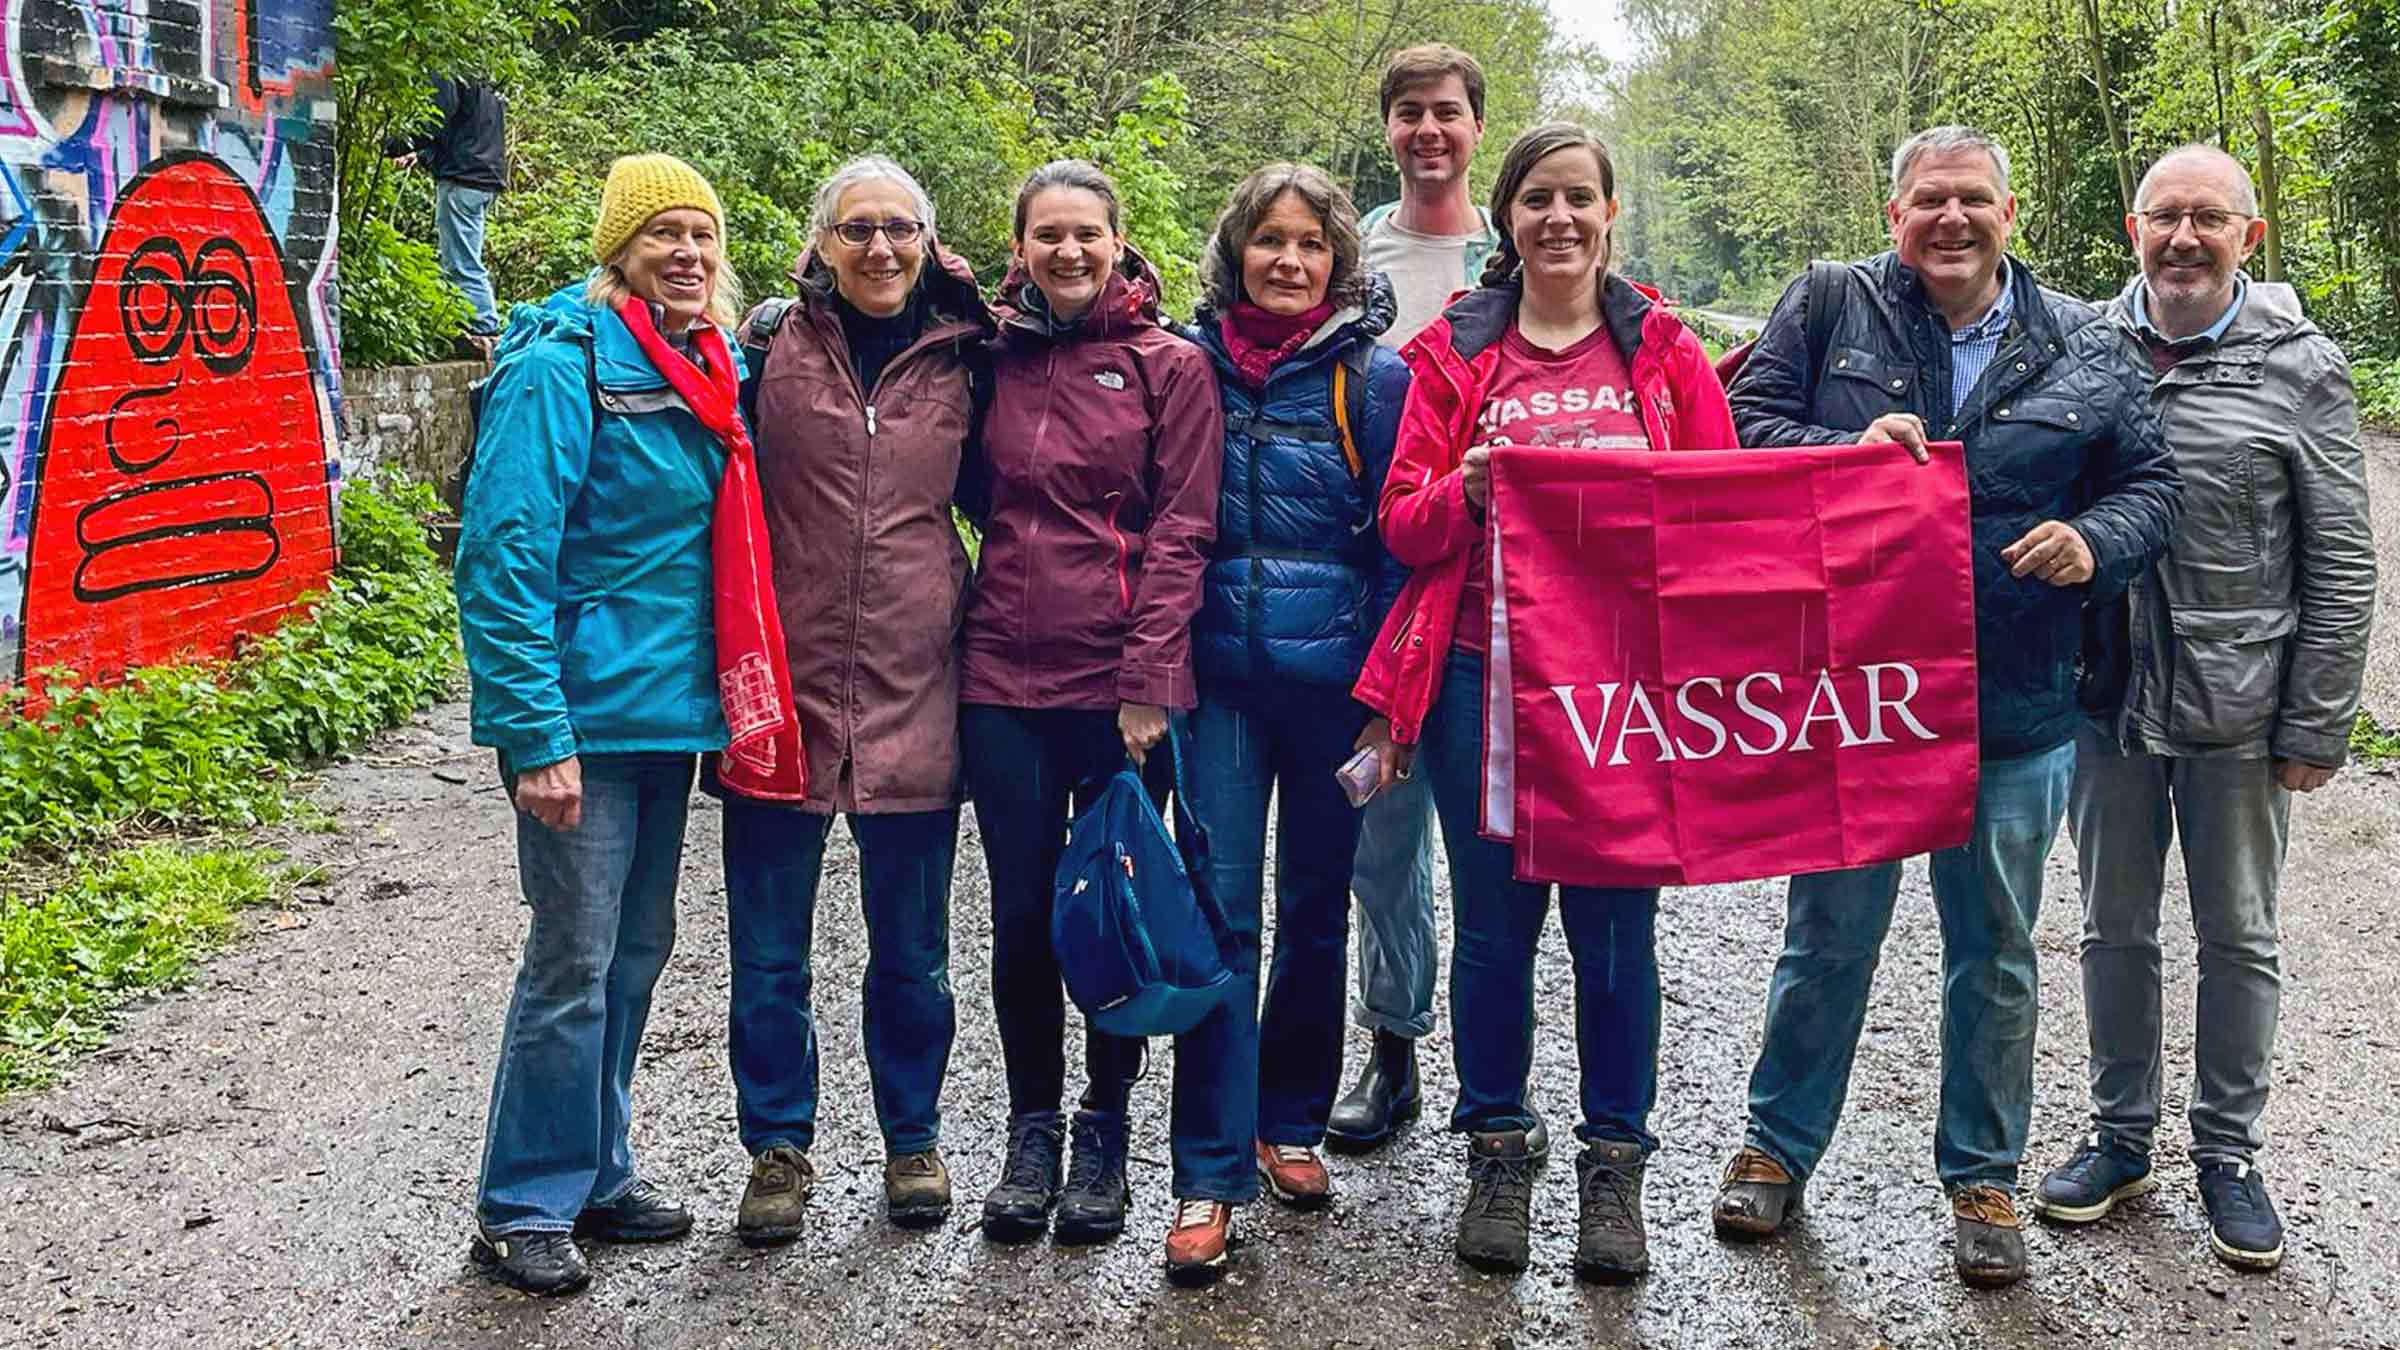 A group of people standing together on a gravel road in a wooded area holding a Vassar banner